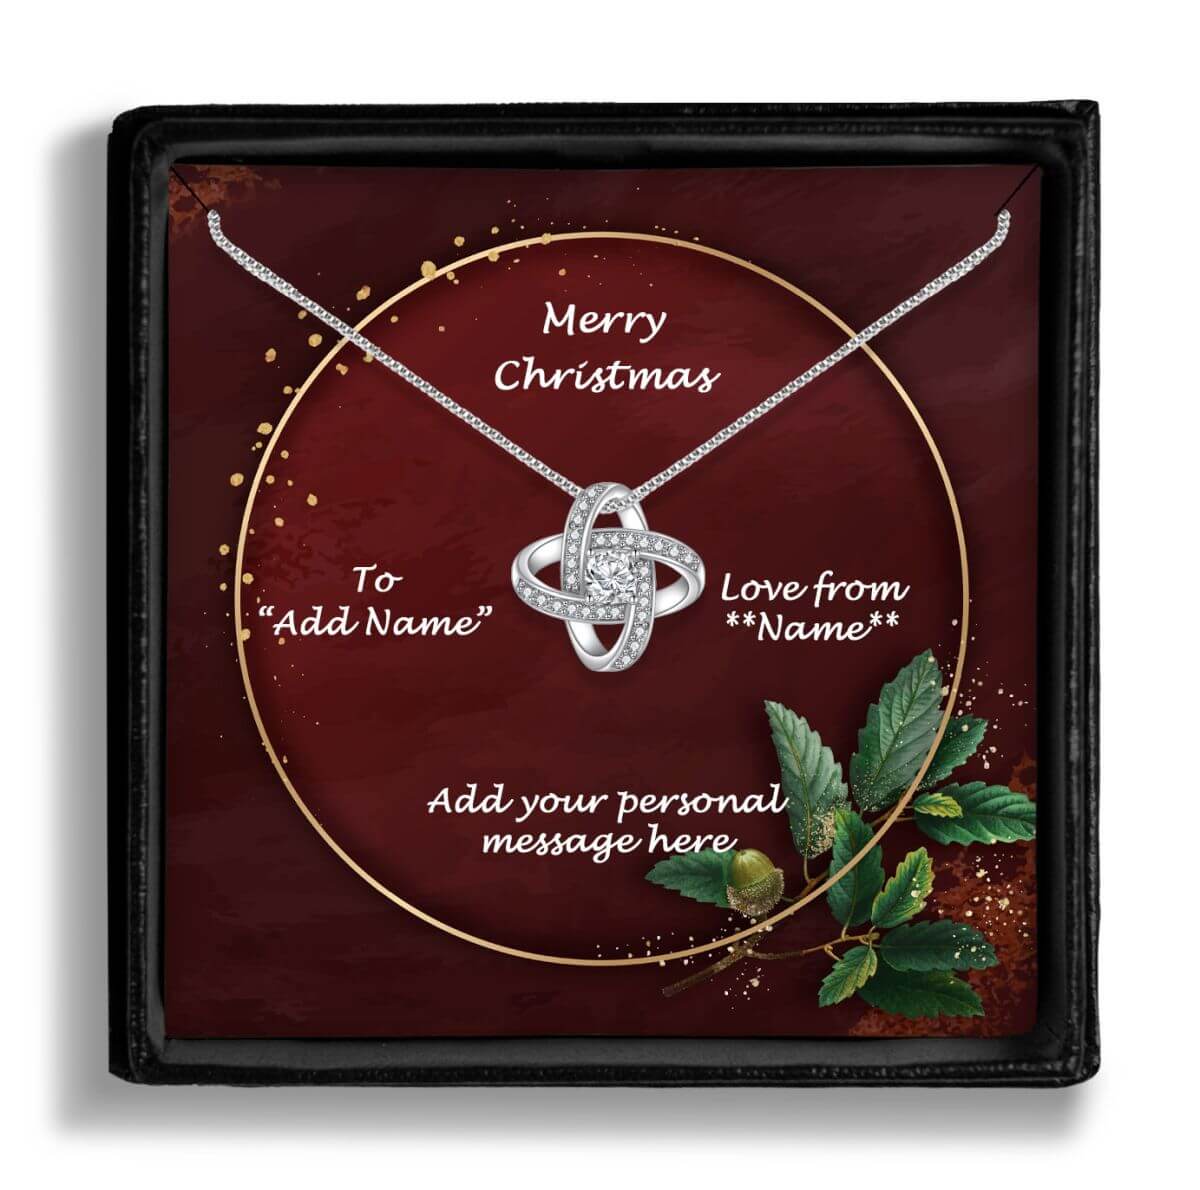 BIG-On-Jewellery-Necklace- top-view-Enduring-Love-Merry-Xmas-personal-message-1